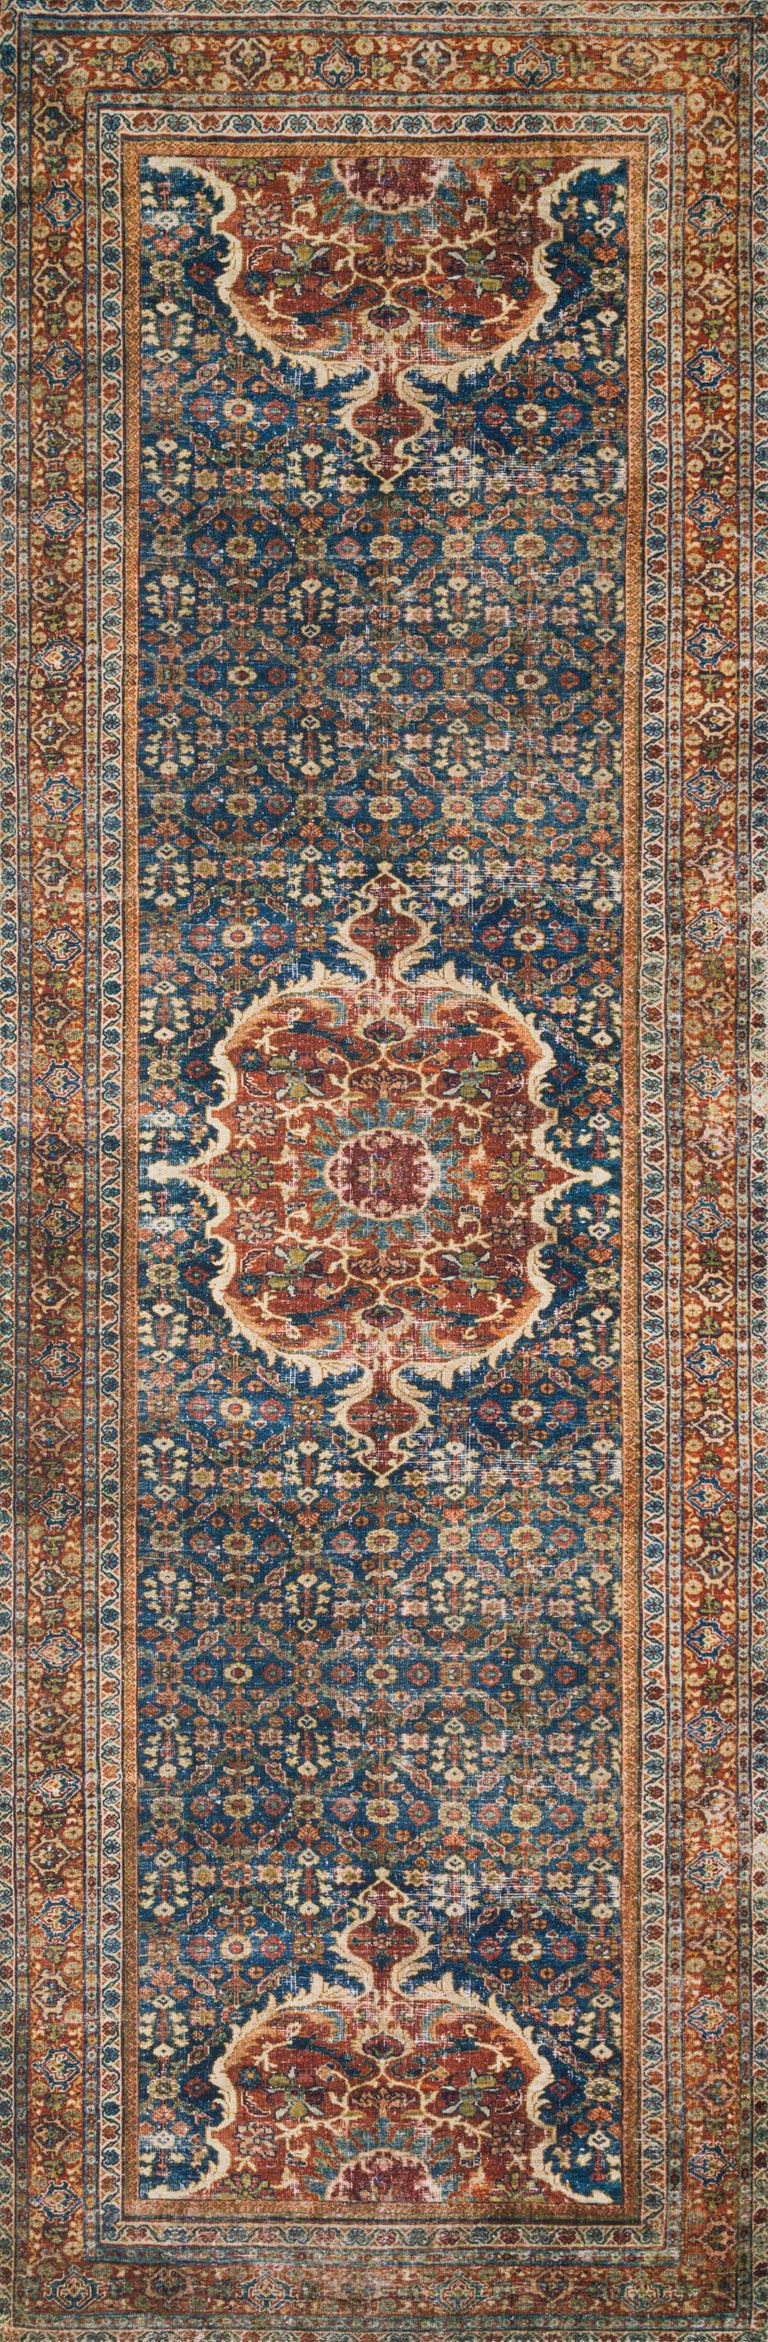 Loloi II Layla Collection Rug in Cobalt Blue, Spice - 9'0" x 12'0"